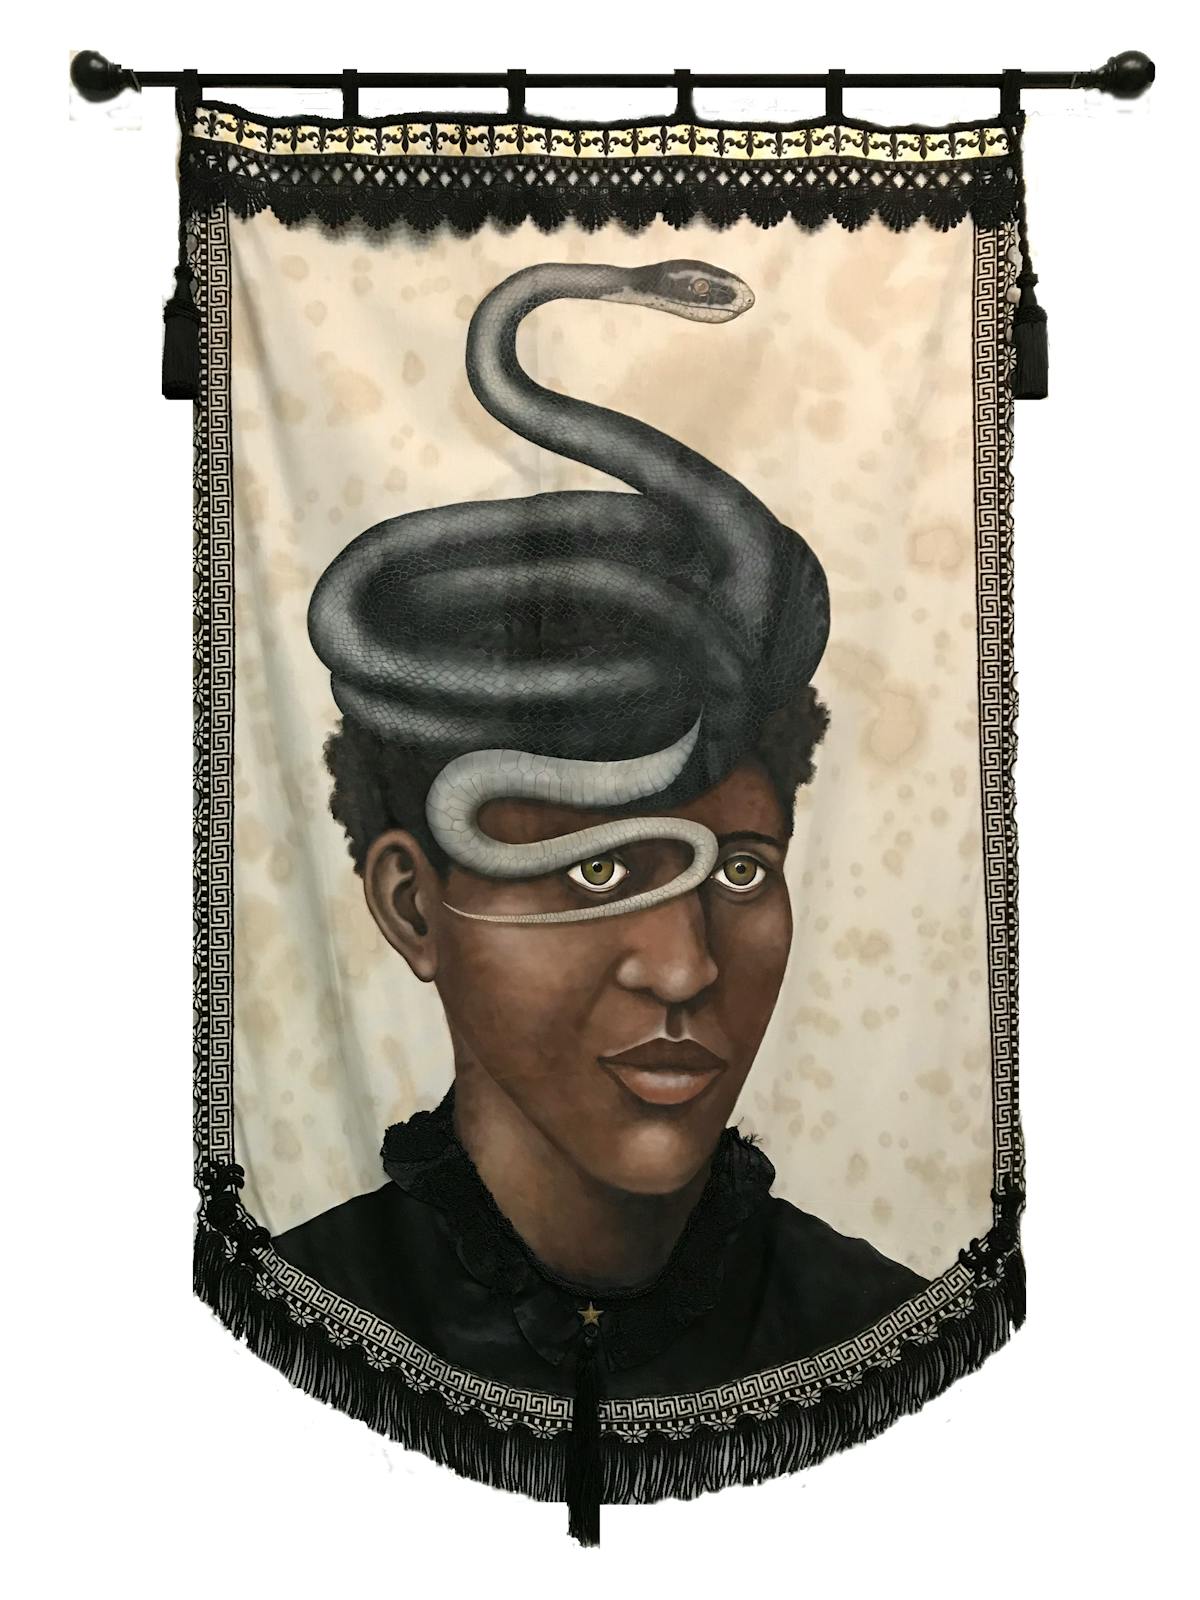 tapestry of person with black snake coiled on their head